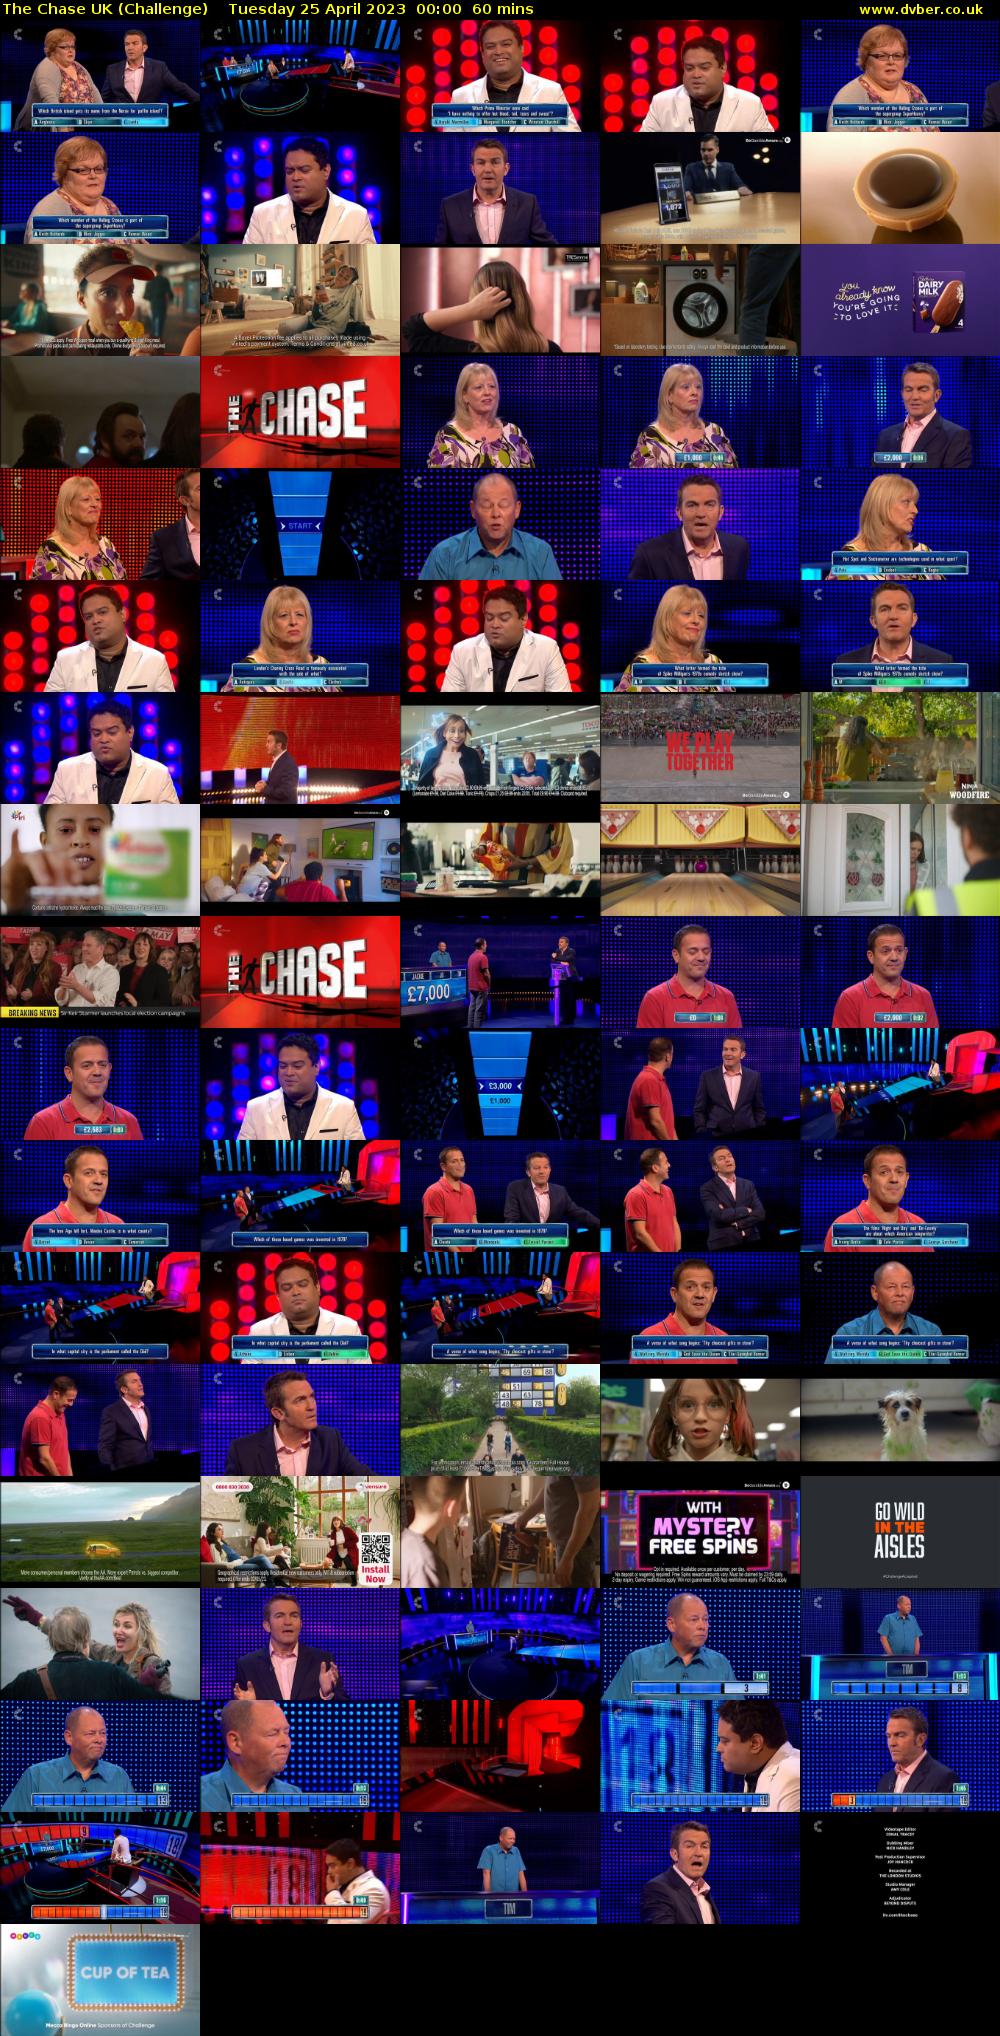 The Chase UK (Challenge) Tuesday 25 April 2023 00:00 - 01:00